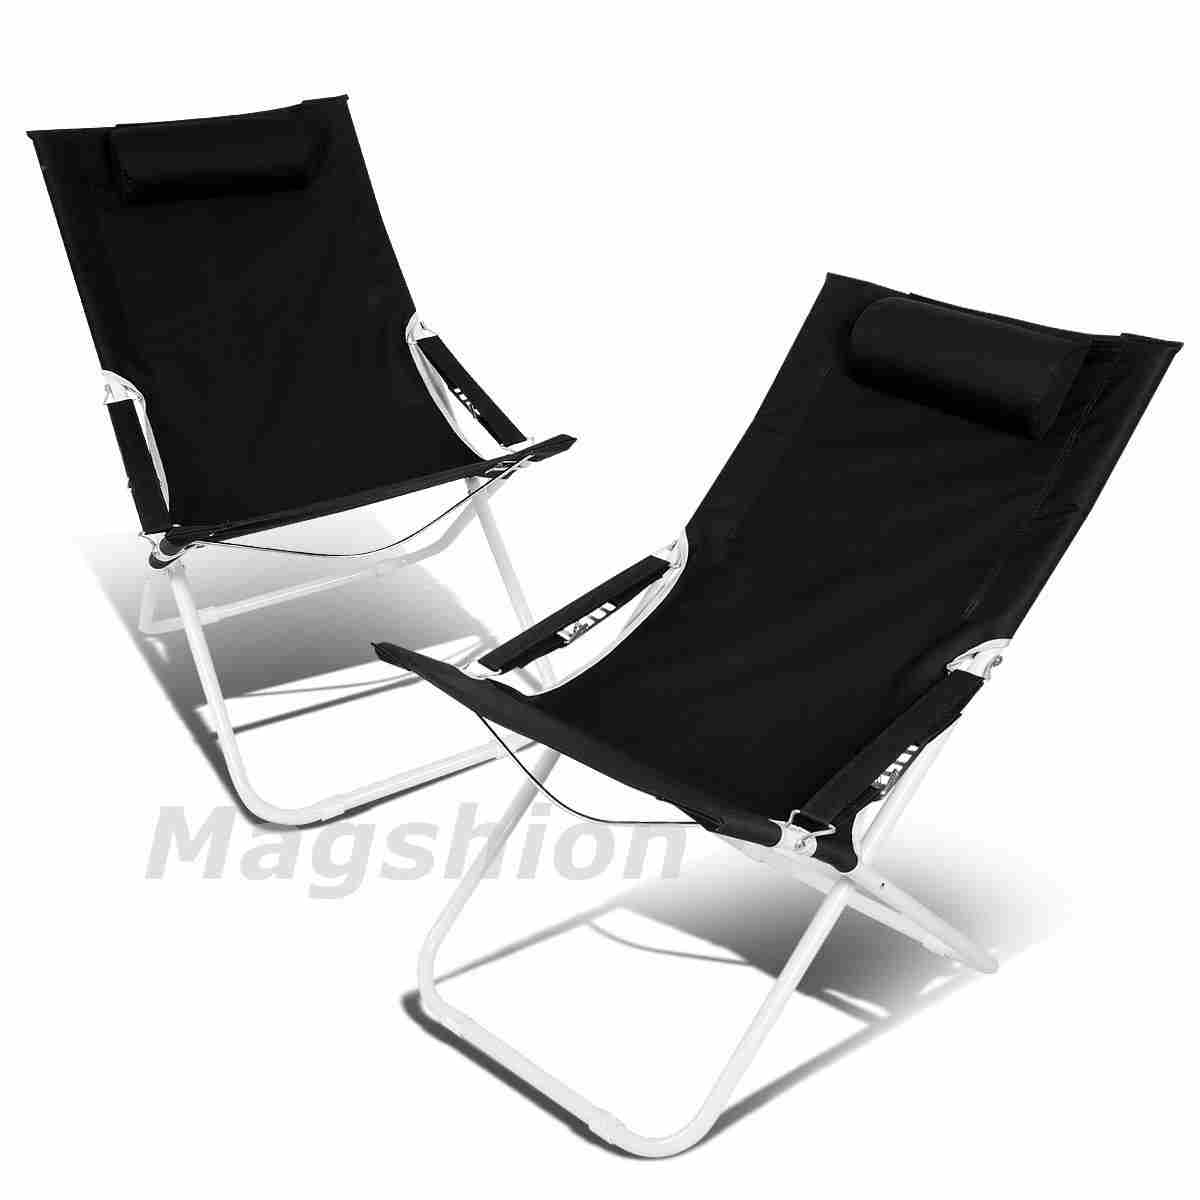 magshion-position-outdoor-camping-chairs